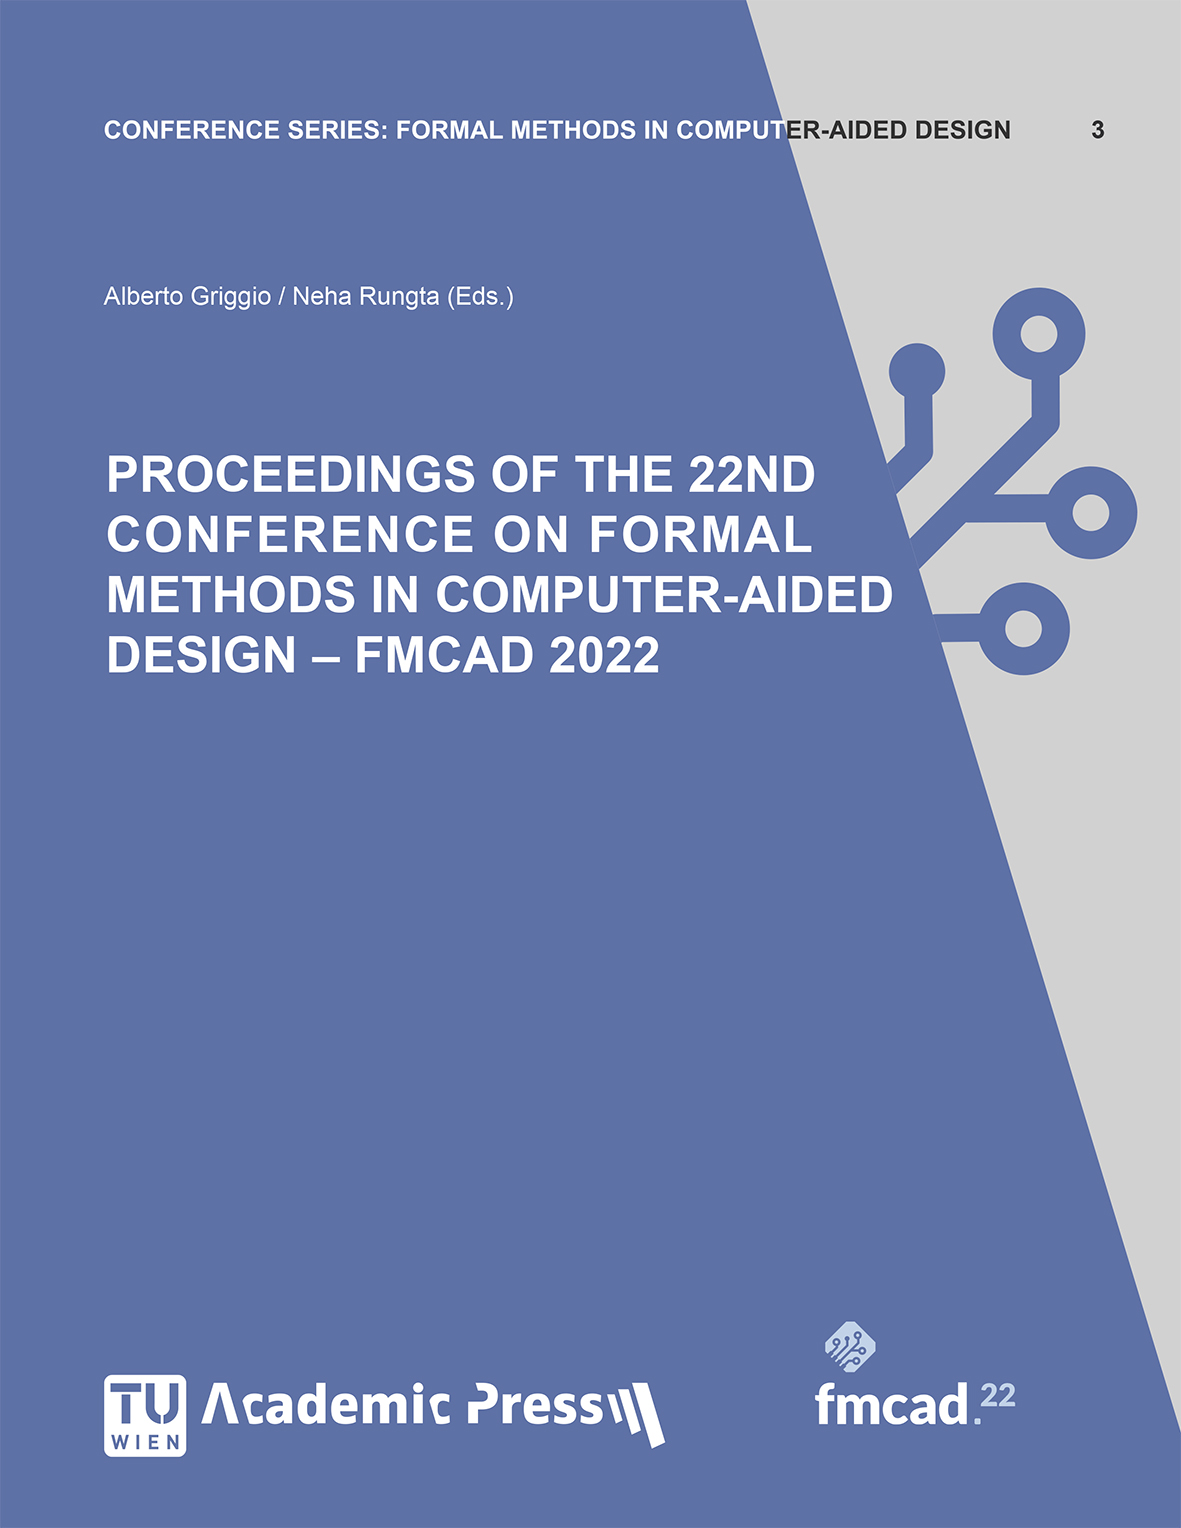 PROCEEDINGS OF THE 22ND CONFERENCE ON FORMAL METHODS IN COMPUTER-AIDED DESIGN – FMCAD 2022